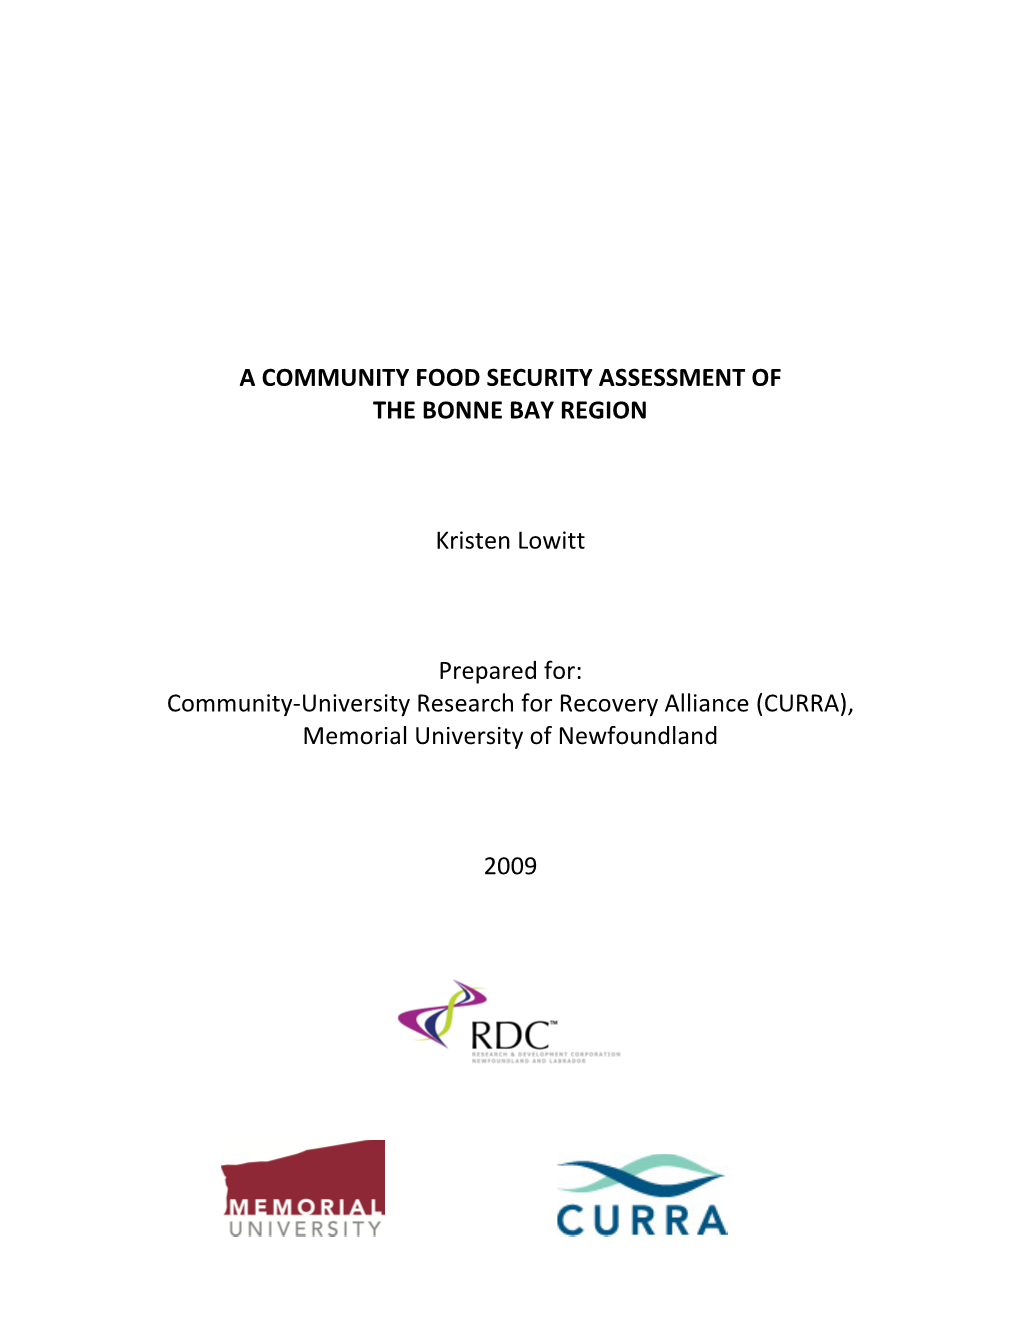 A Community Food Security Assessment of the Bonne Bay Region